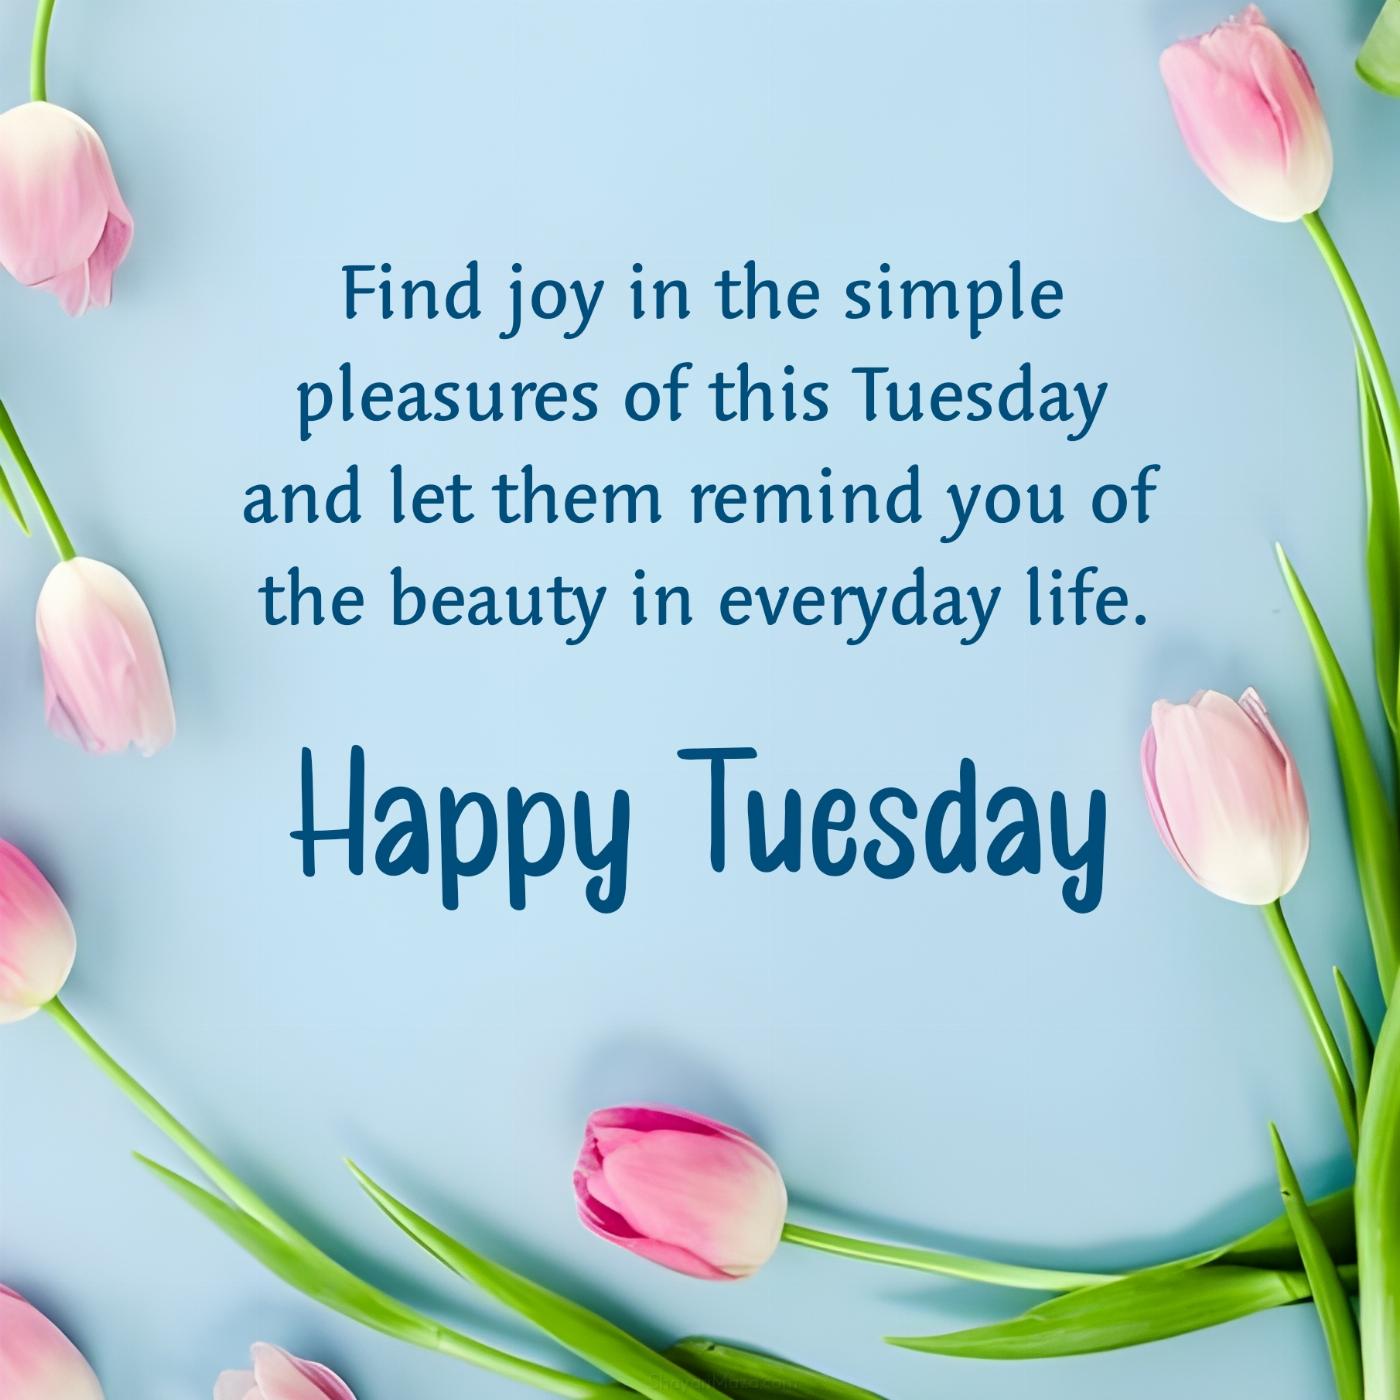 Find joy in the simple pleasures of this Tuesday